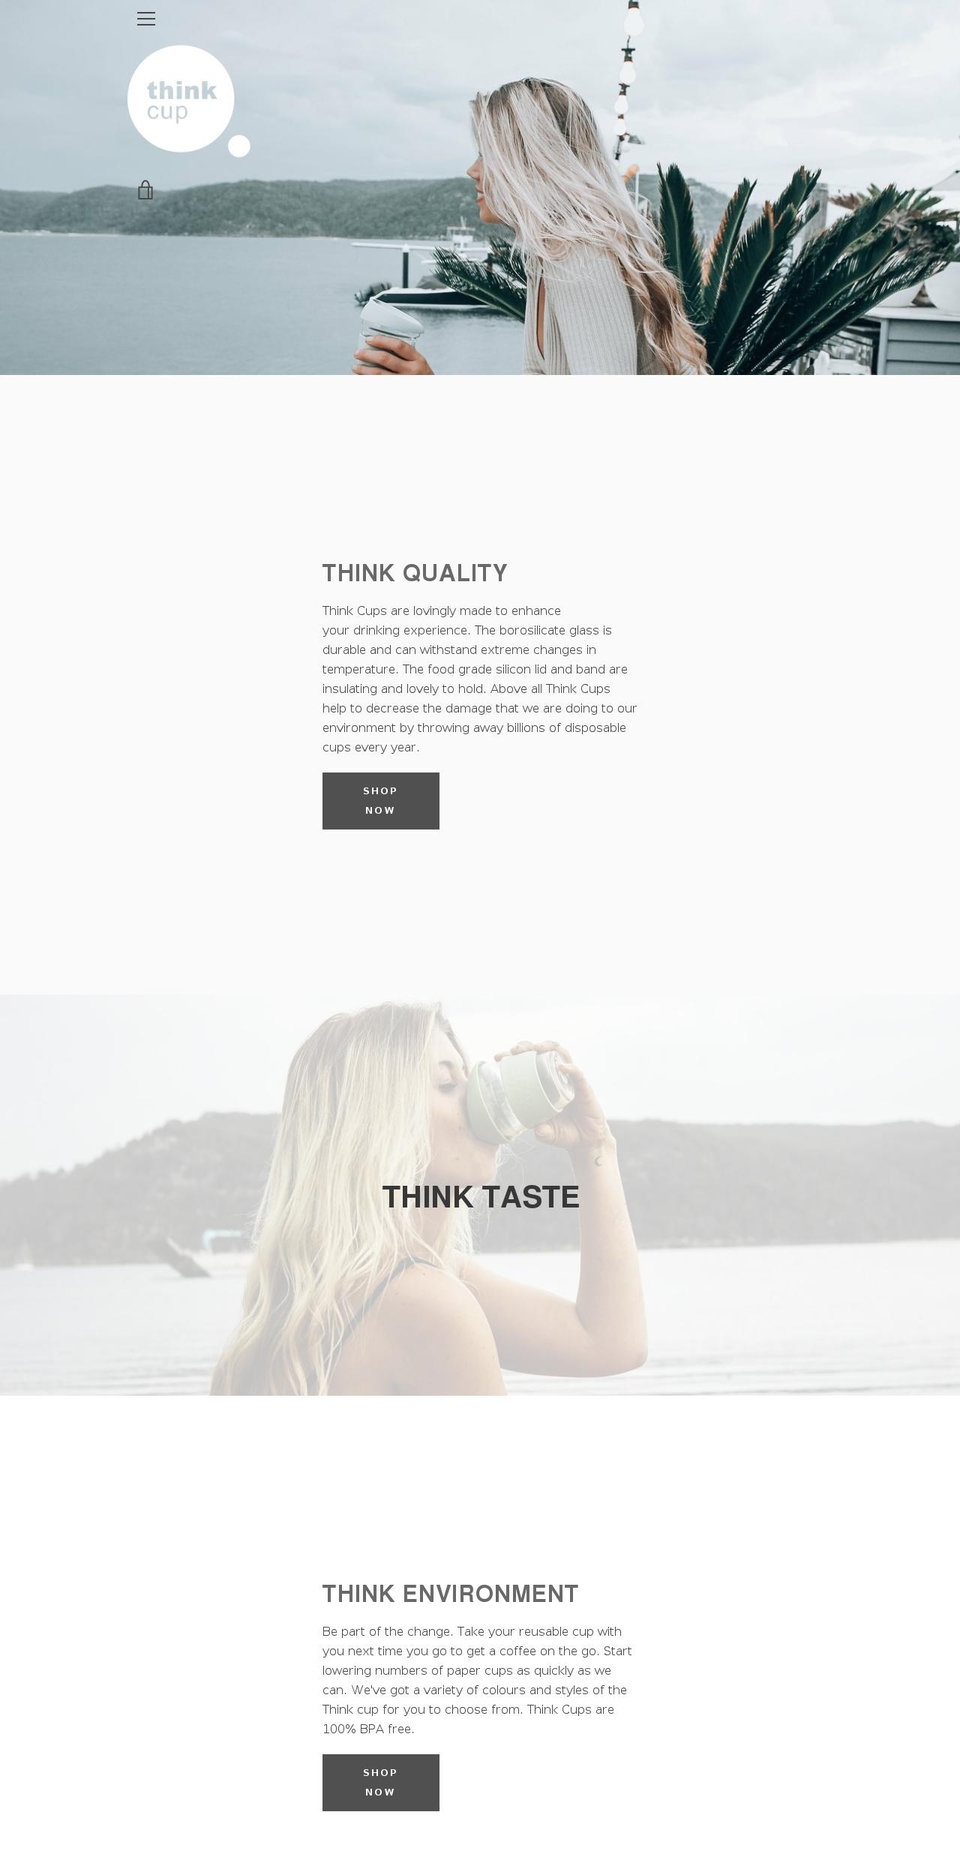 Narrative - Initial Shopify theme site example thinkcups.com